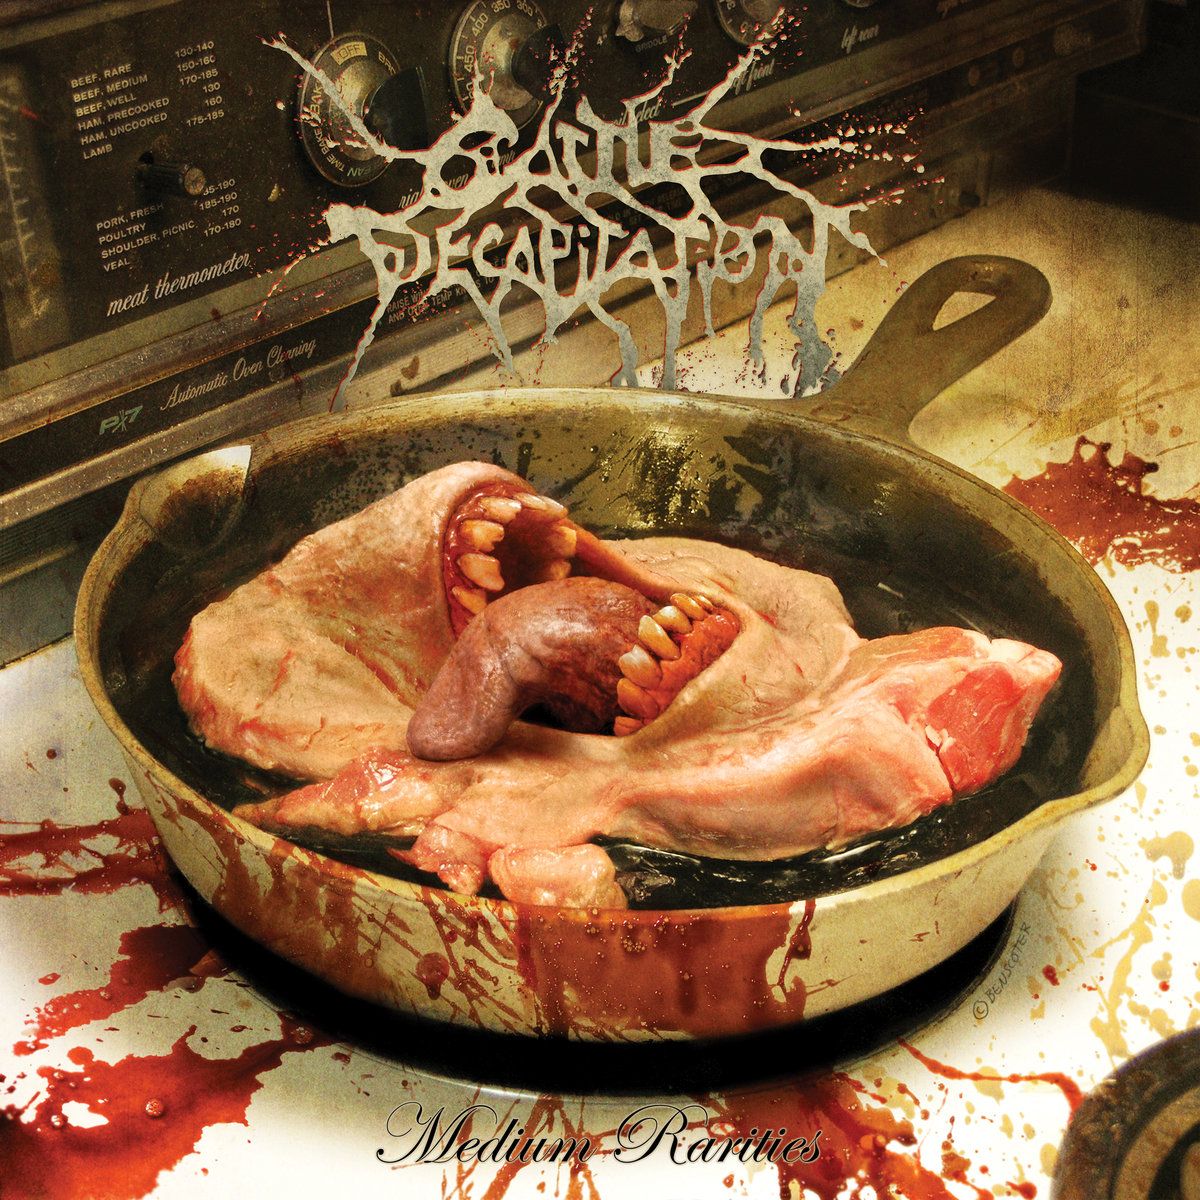 Cattle Decapitation to Release Rarities Collection